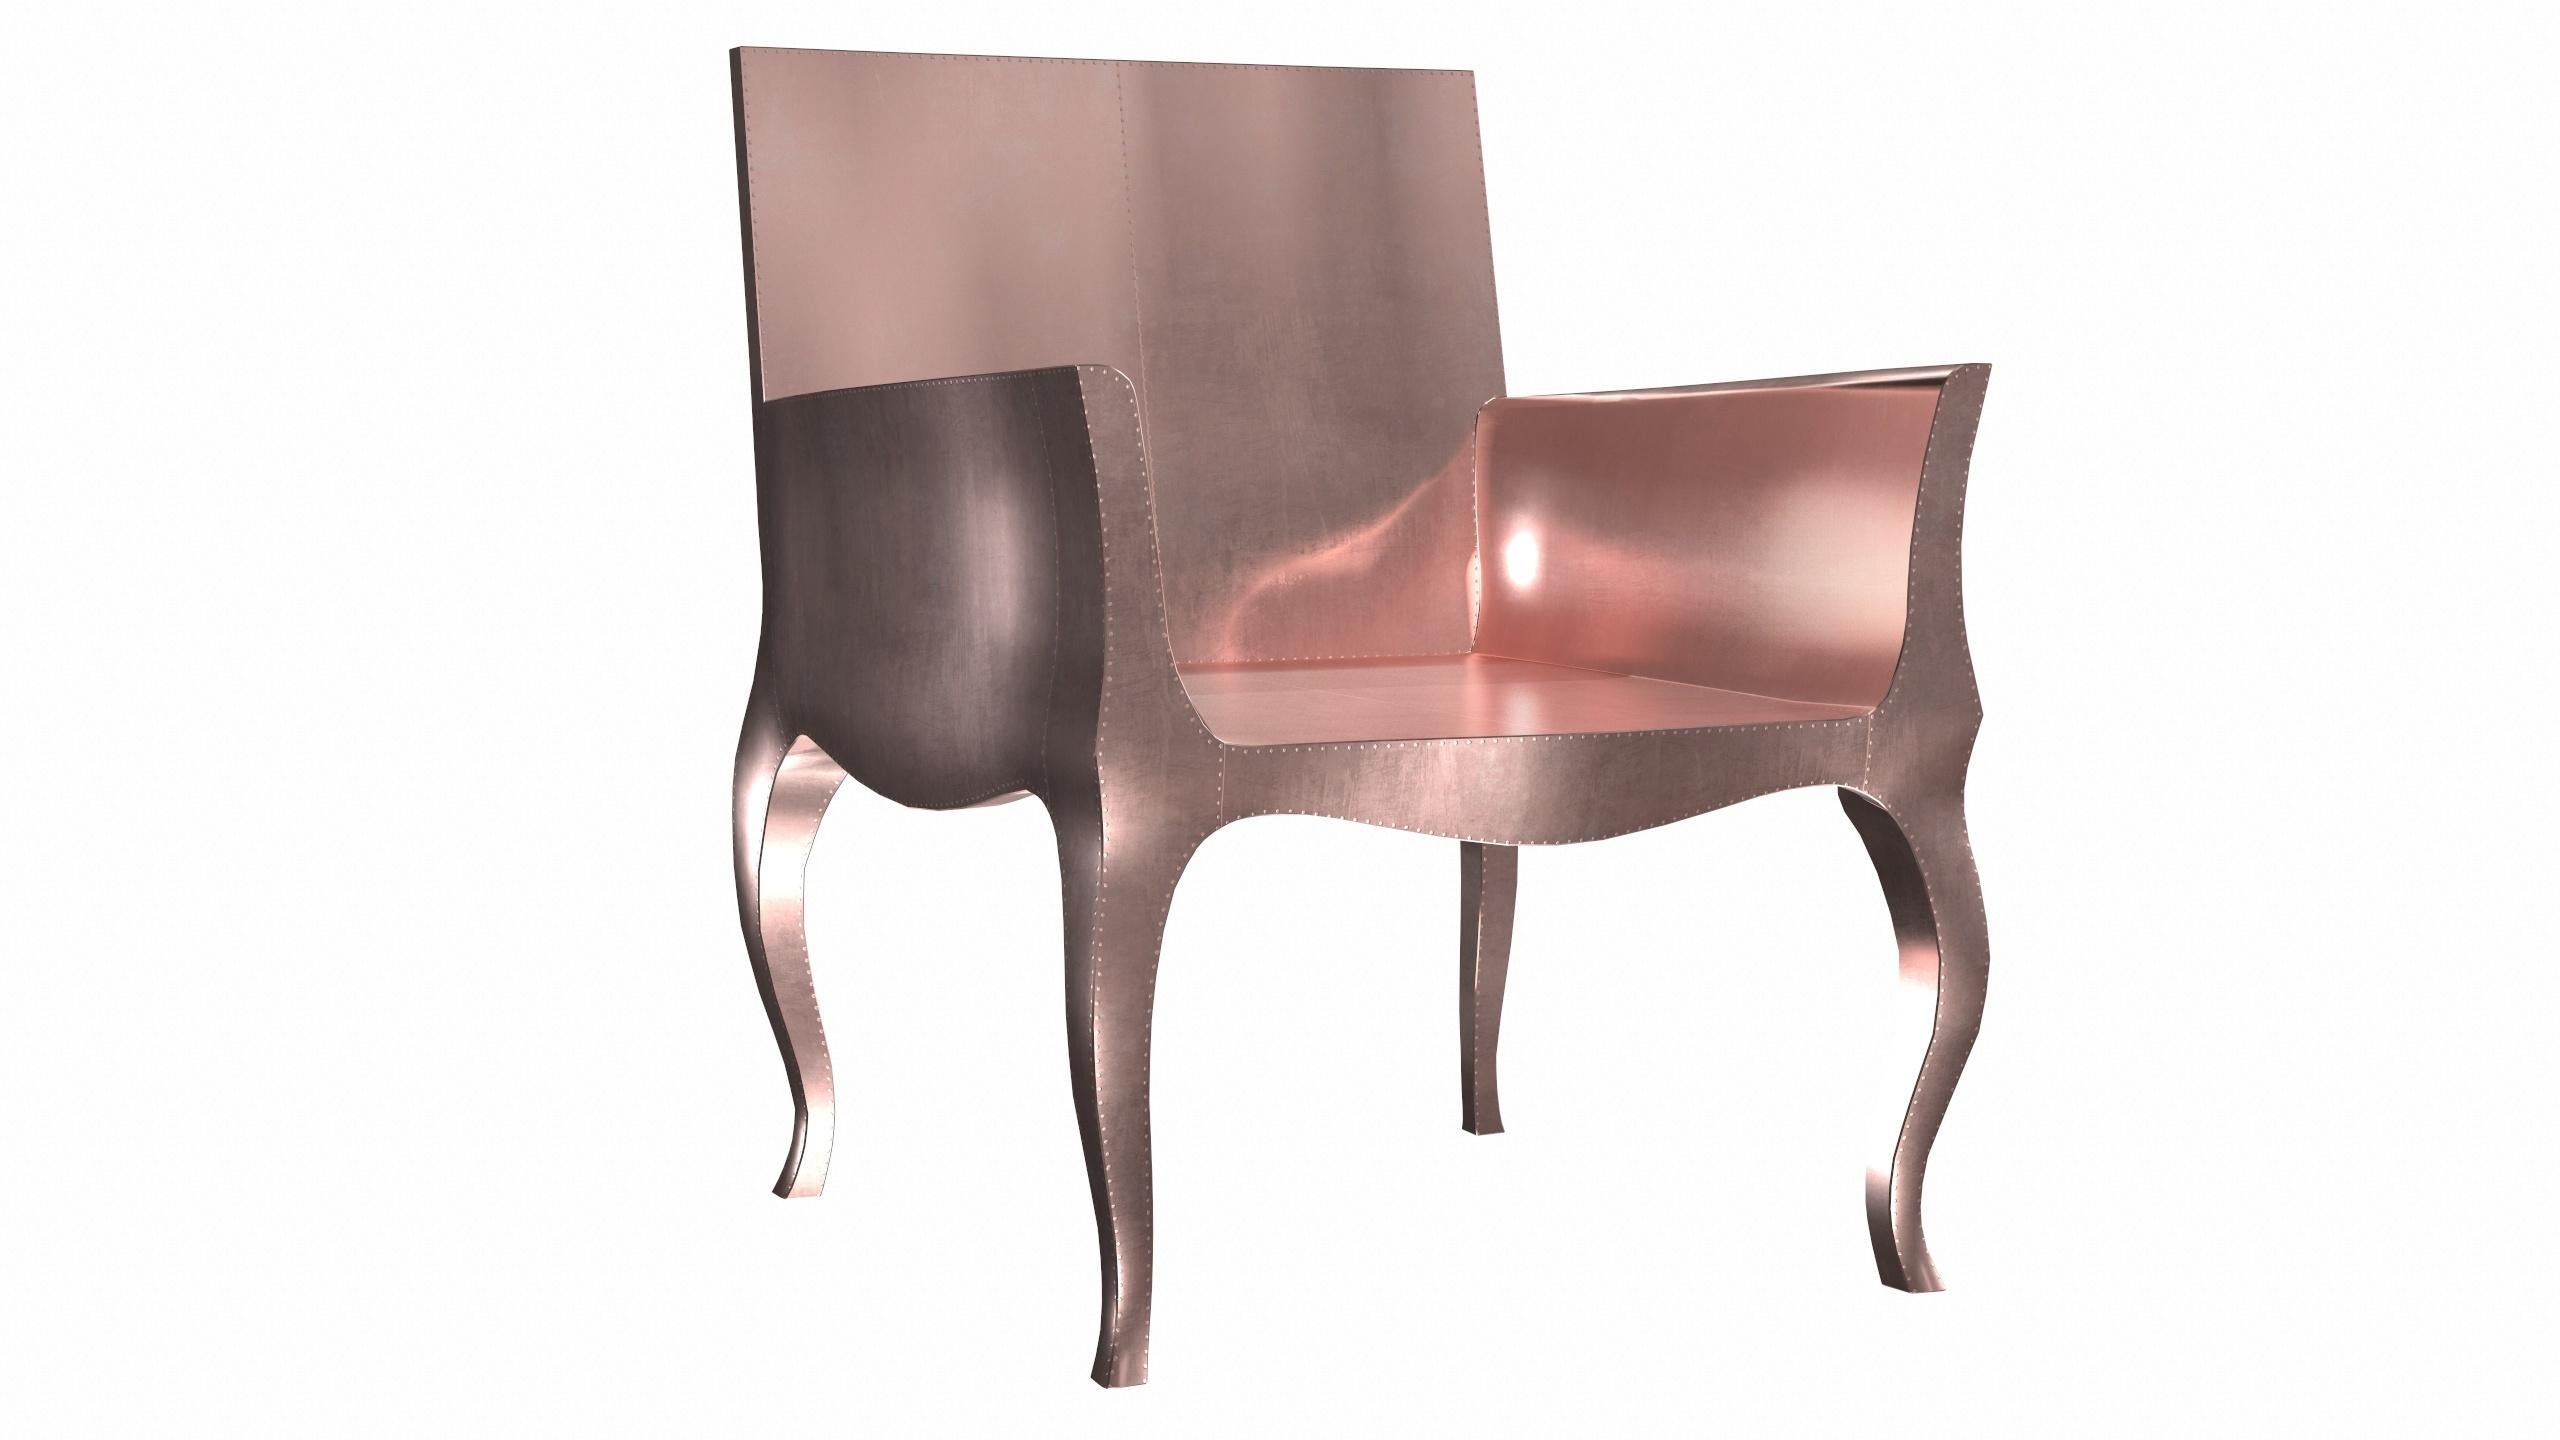 Art Nouveau Chairs in Smooth Copper by Paul Mathieu for S. Odegard In New Condition For Sale In New York, NY